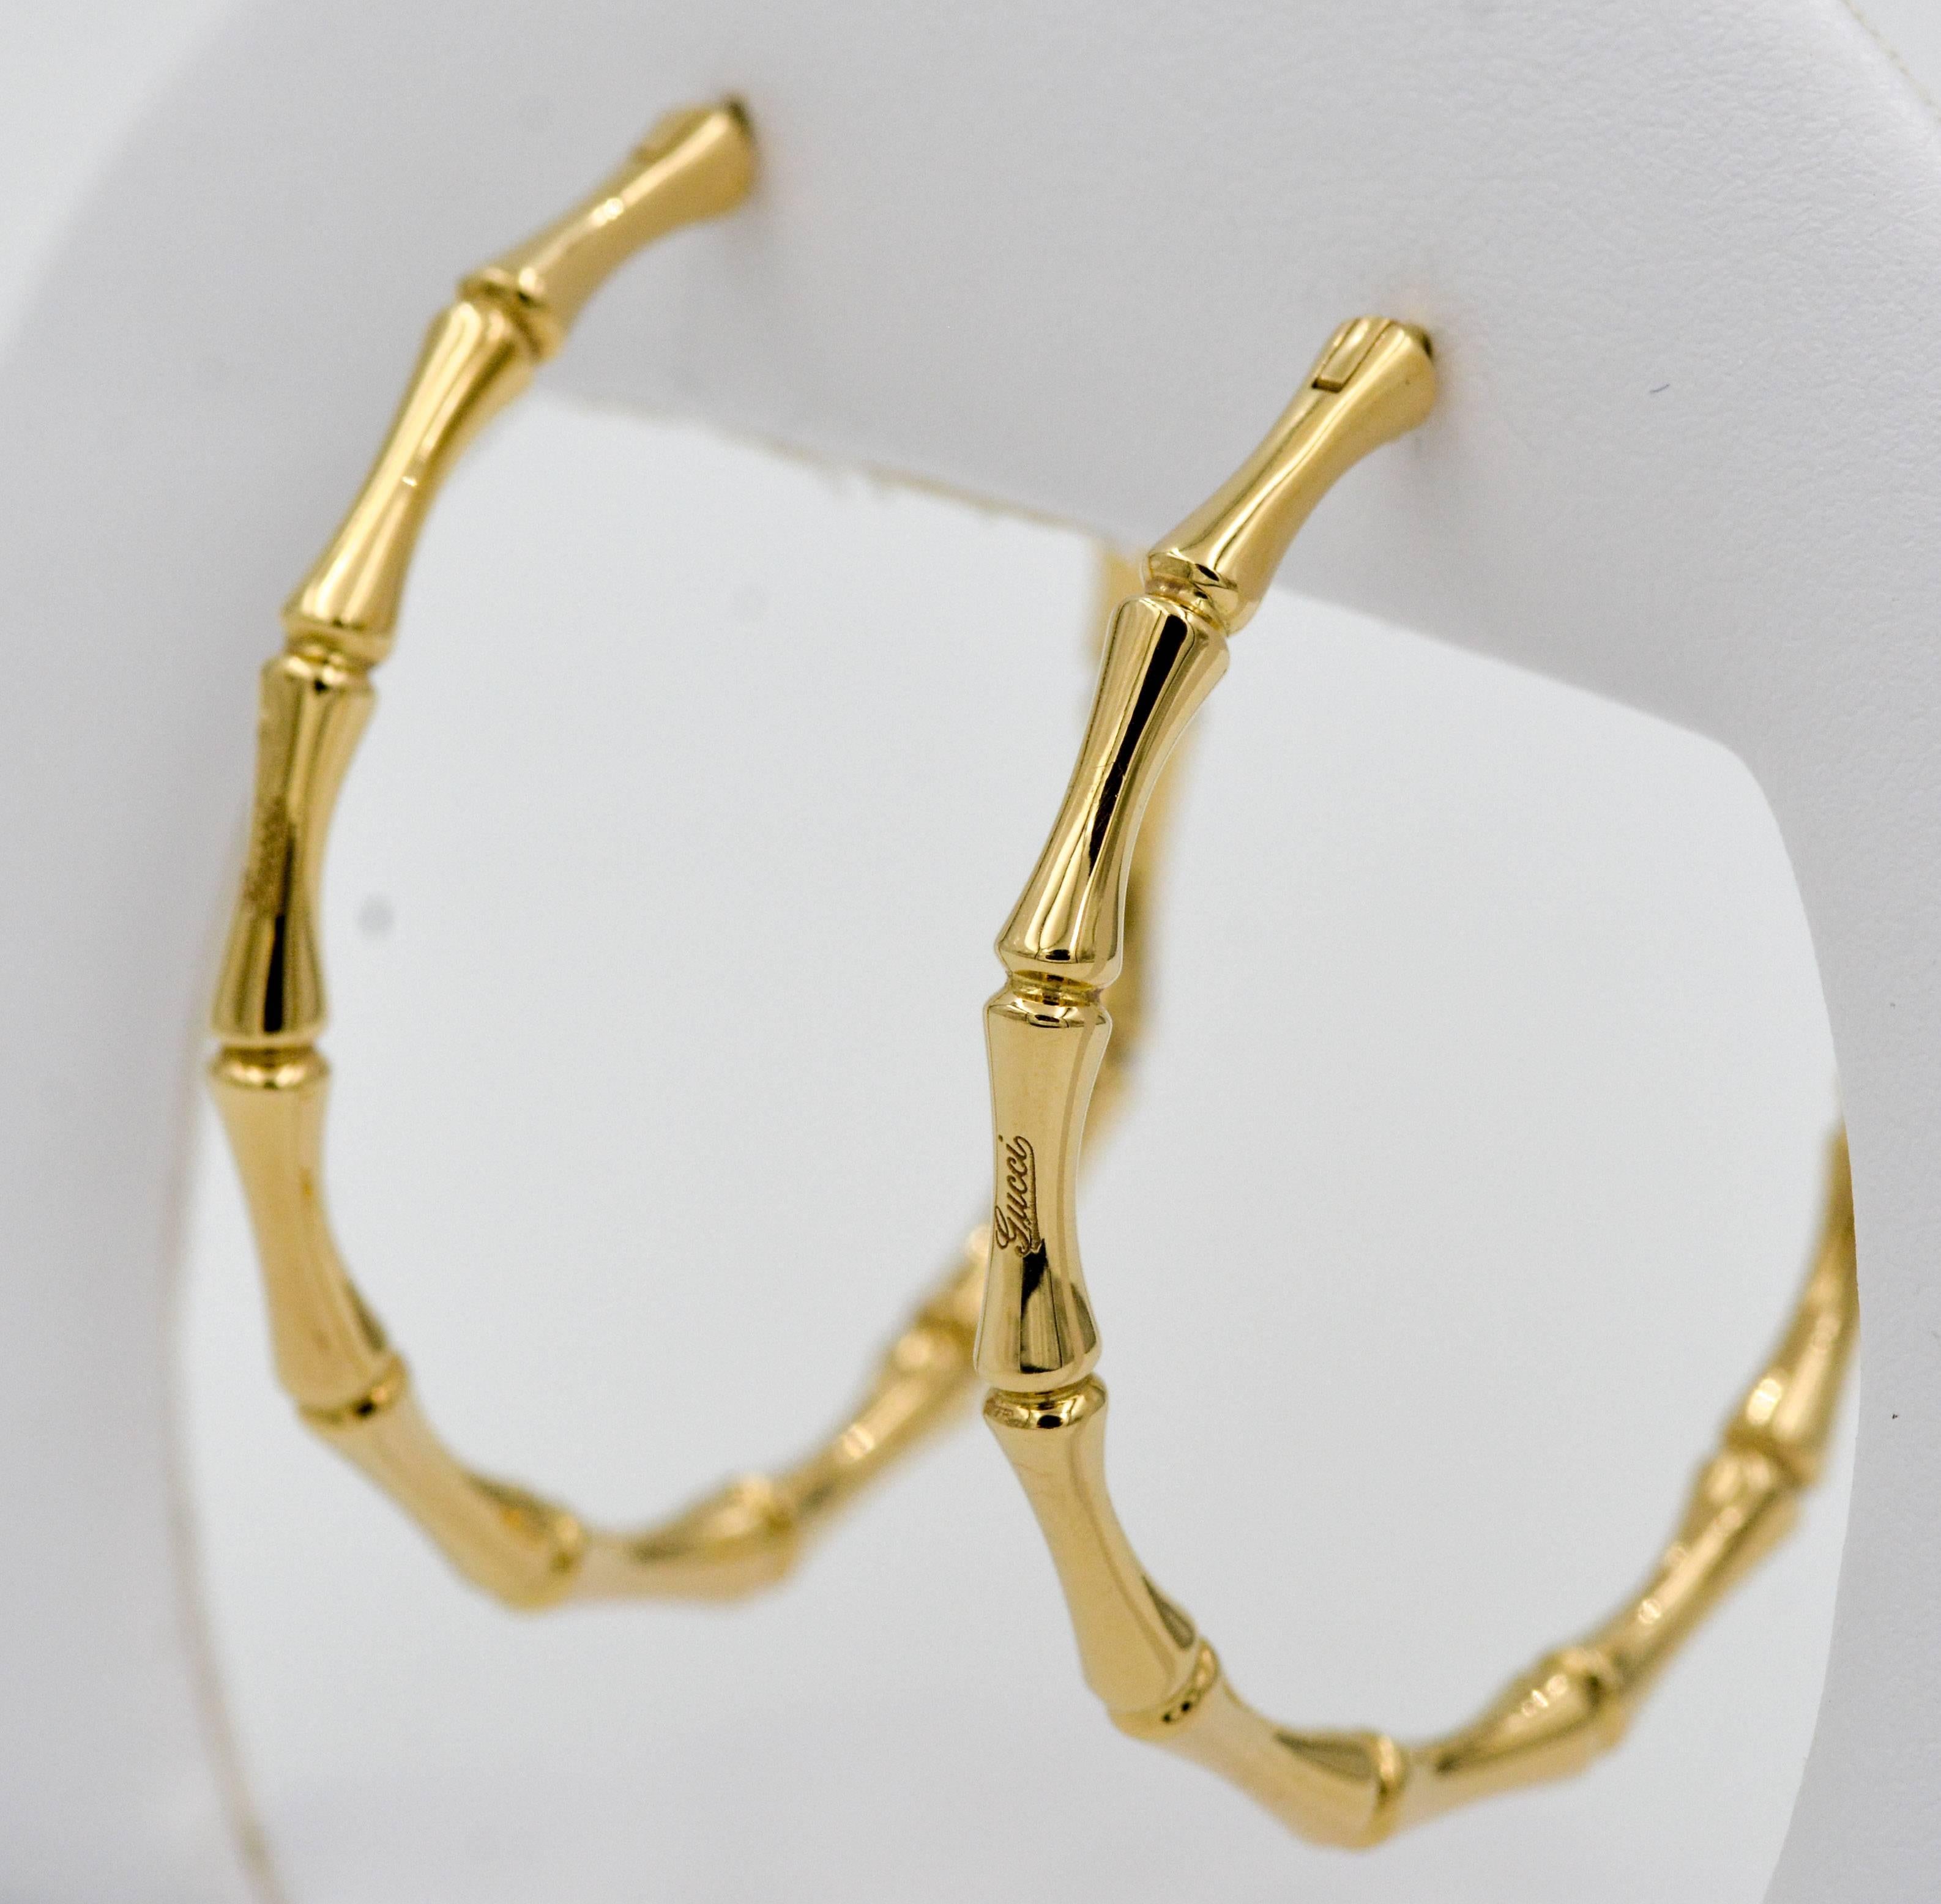 These elegant 18kt yellow gold Gucci earrings are done in the signature bamboo style. The hoops measure 4.5 mm in over all diameter with a thickness of 3.21 mm.  The earrings are secured by a comfortable hinged wire.  These classic Gucci earrings